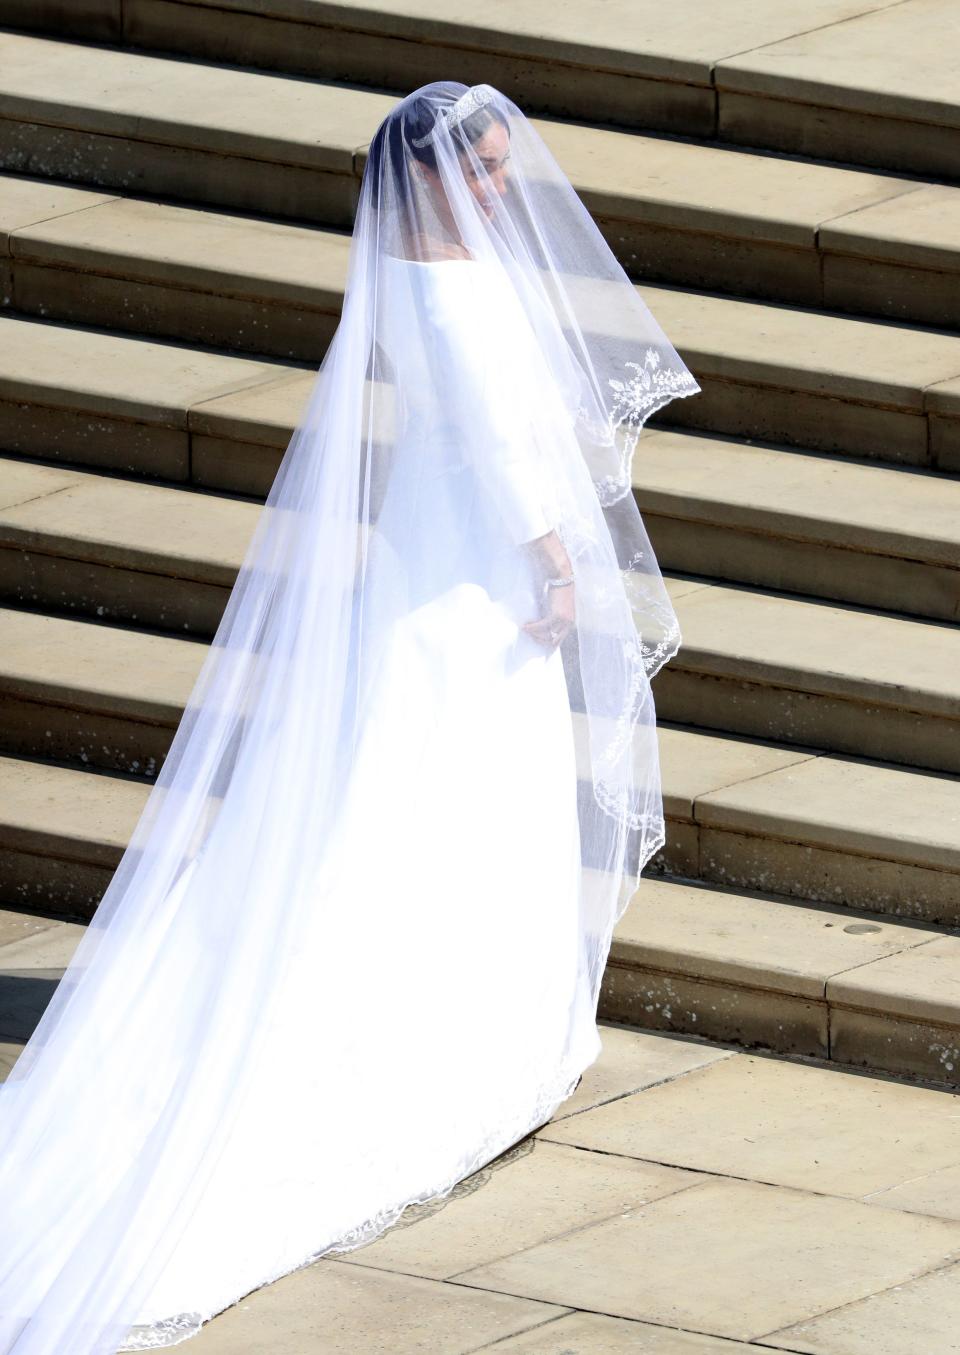 Meghan Markle's wedding dress has been revealed as Givenchy couture designed by Clare Waight Keller. See the simple bateau-neck style here.